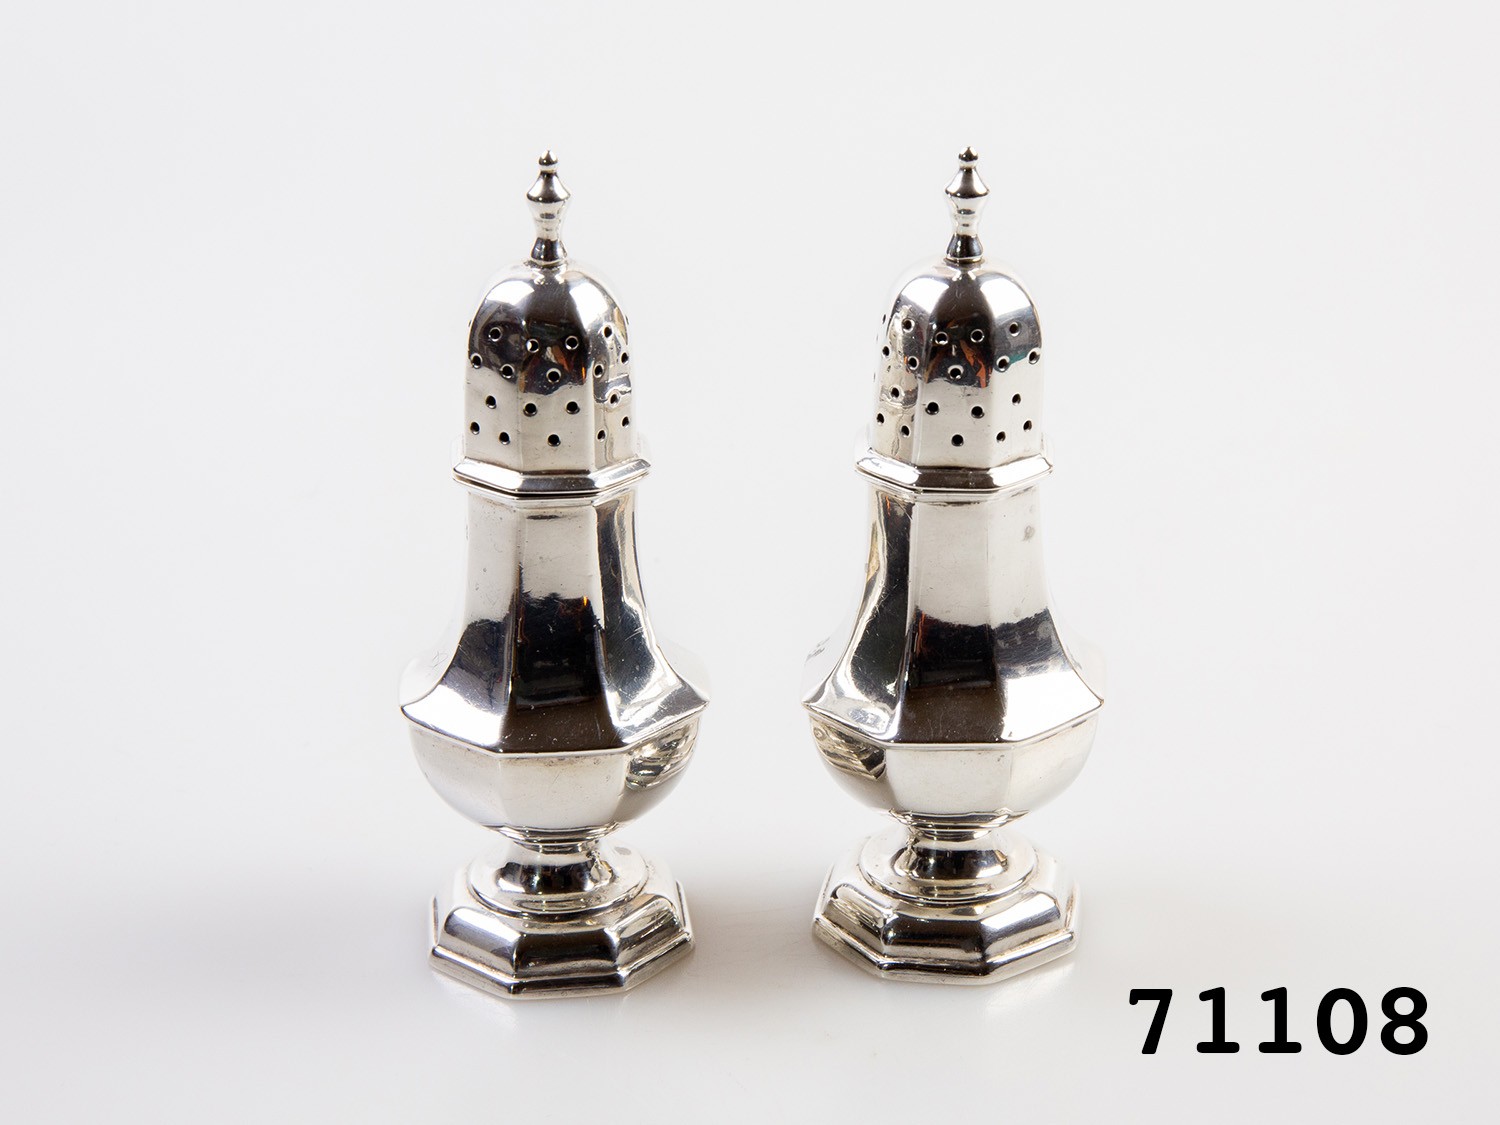 Antique pair of small sugar sifters. Each hallmarked to the side for Birmingham assay c1903 Made by Edward Souter Barnsley & Co. Some signs of wear. Each measures approximately 32mm in diameter at base and 92mm tall.  Main photo of both shakers standing side by side